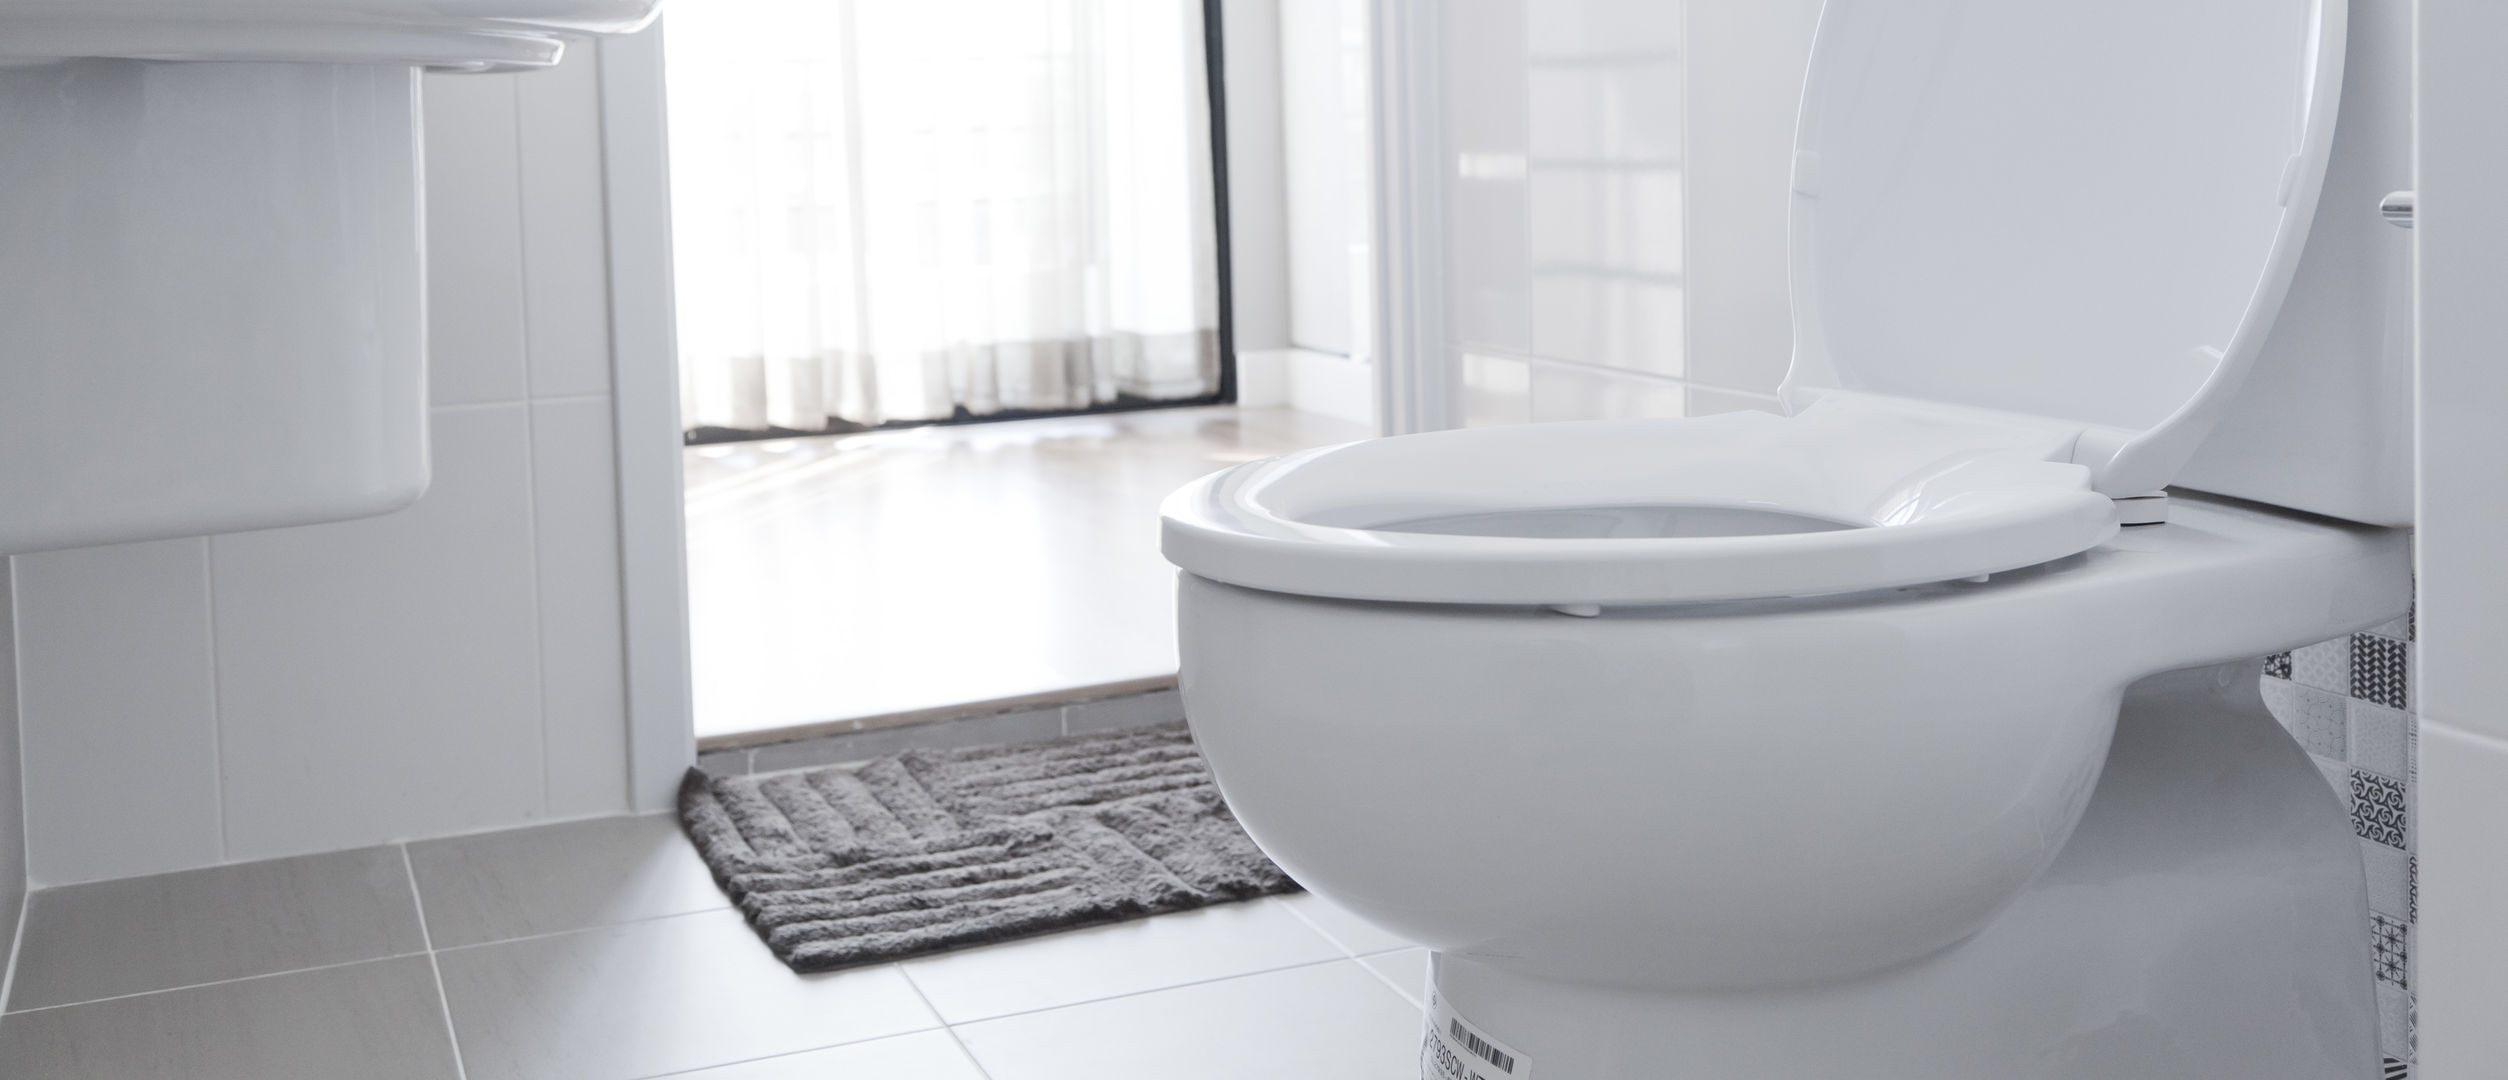 Clogged Toilet Repair in San Antonio, TX, by Will Fix It